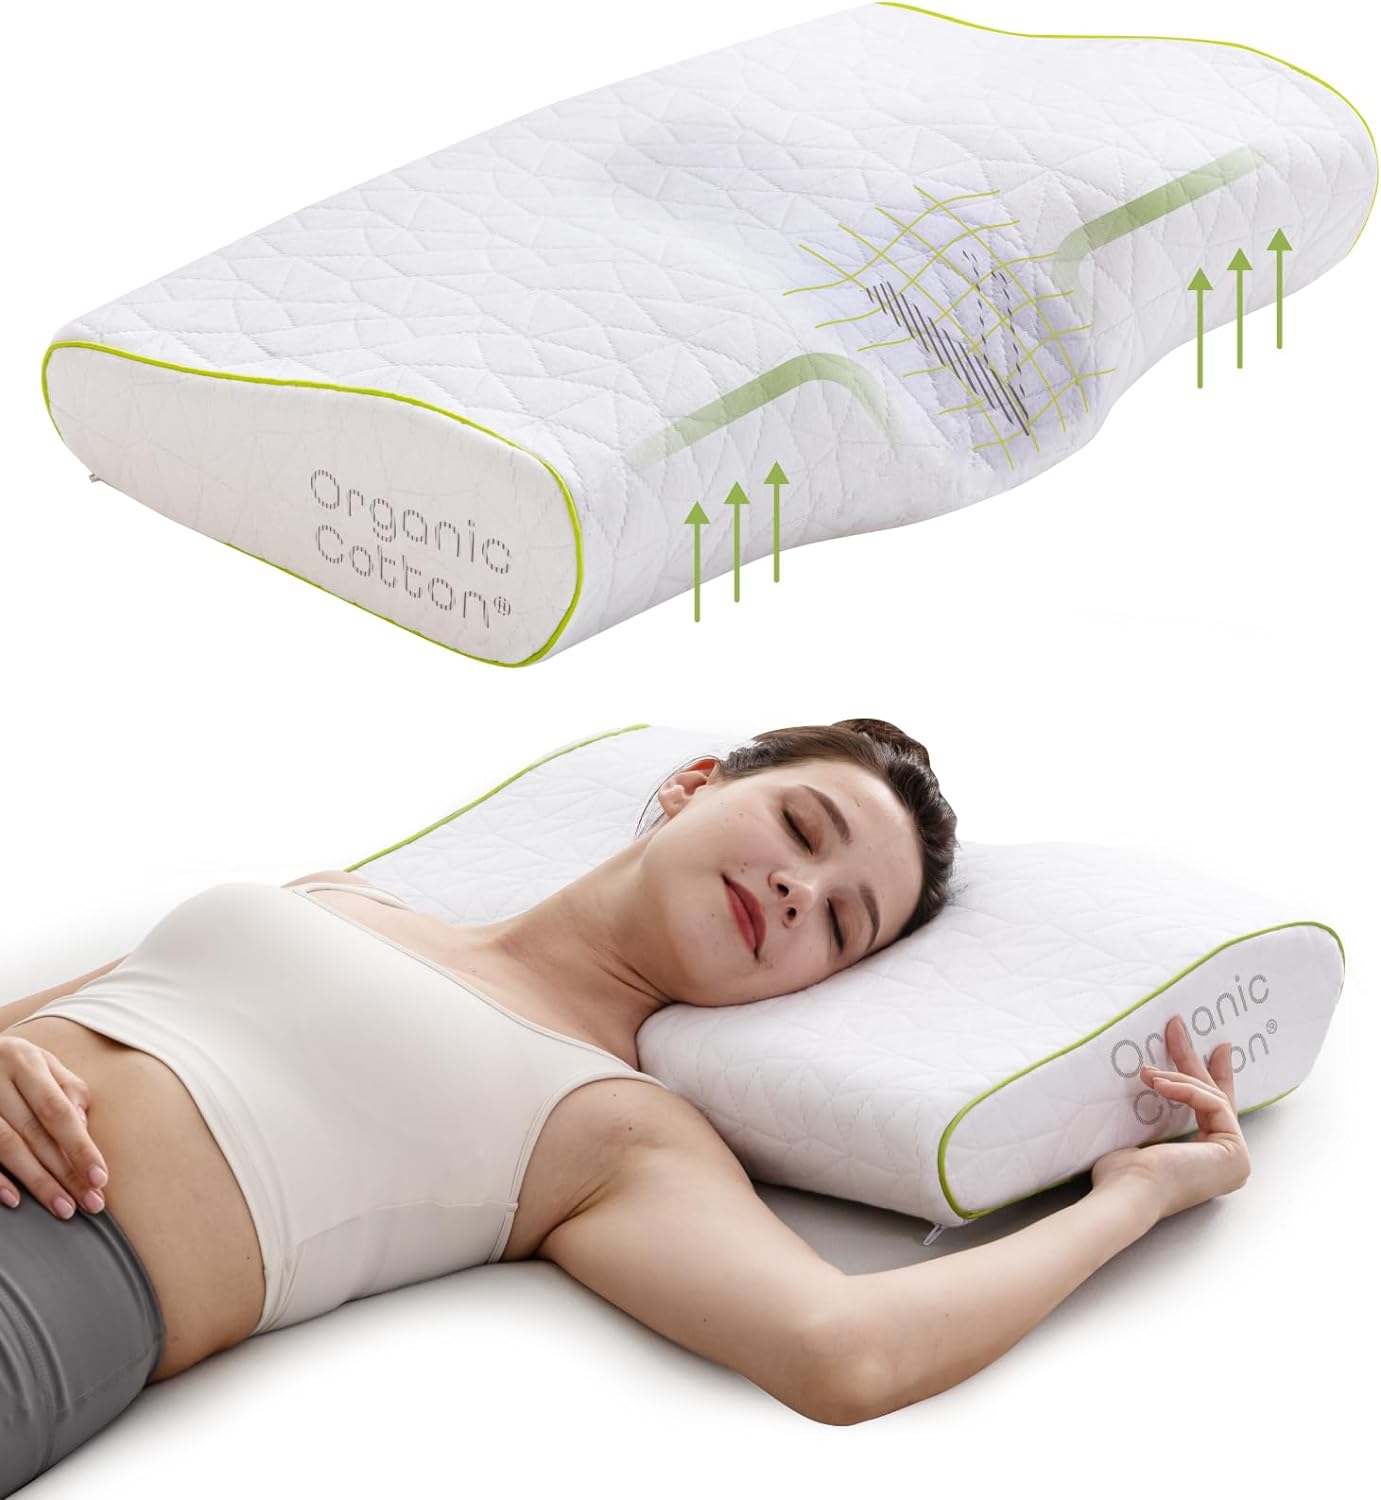 New Adjustable Contour Memory Foam Pillow - Standard Size - Orthopedic Neck Support, Pain Relief, Washable, Organic Cotton Cover Ergonomic Cervical - Ideal for Side, Back & Stomach Sleepers…